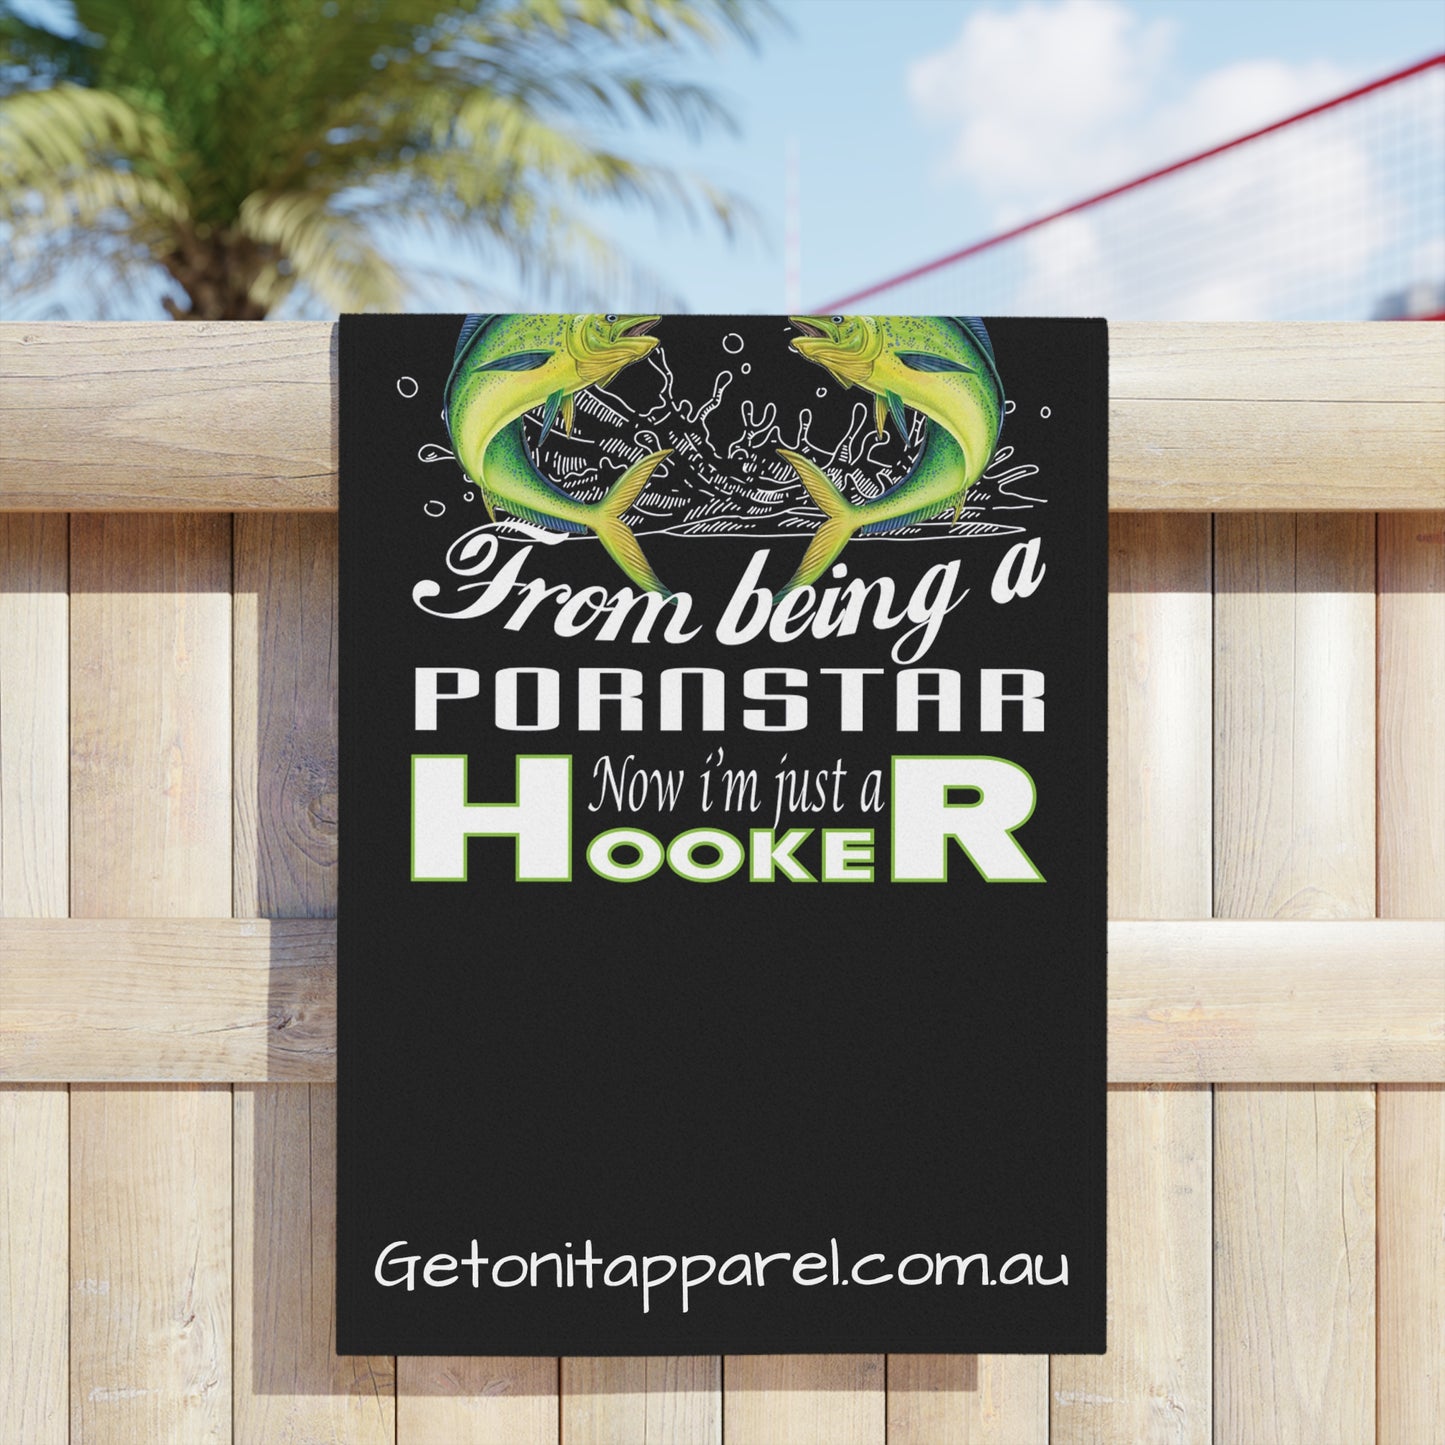 Beach Towels - Fishing Saved Me From Being a Pornstar Now Im Just A Hooker.